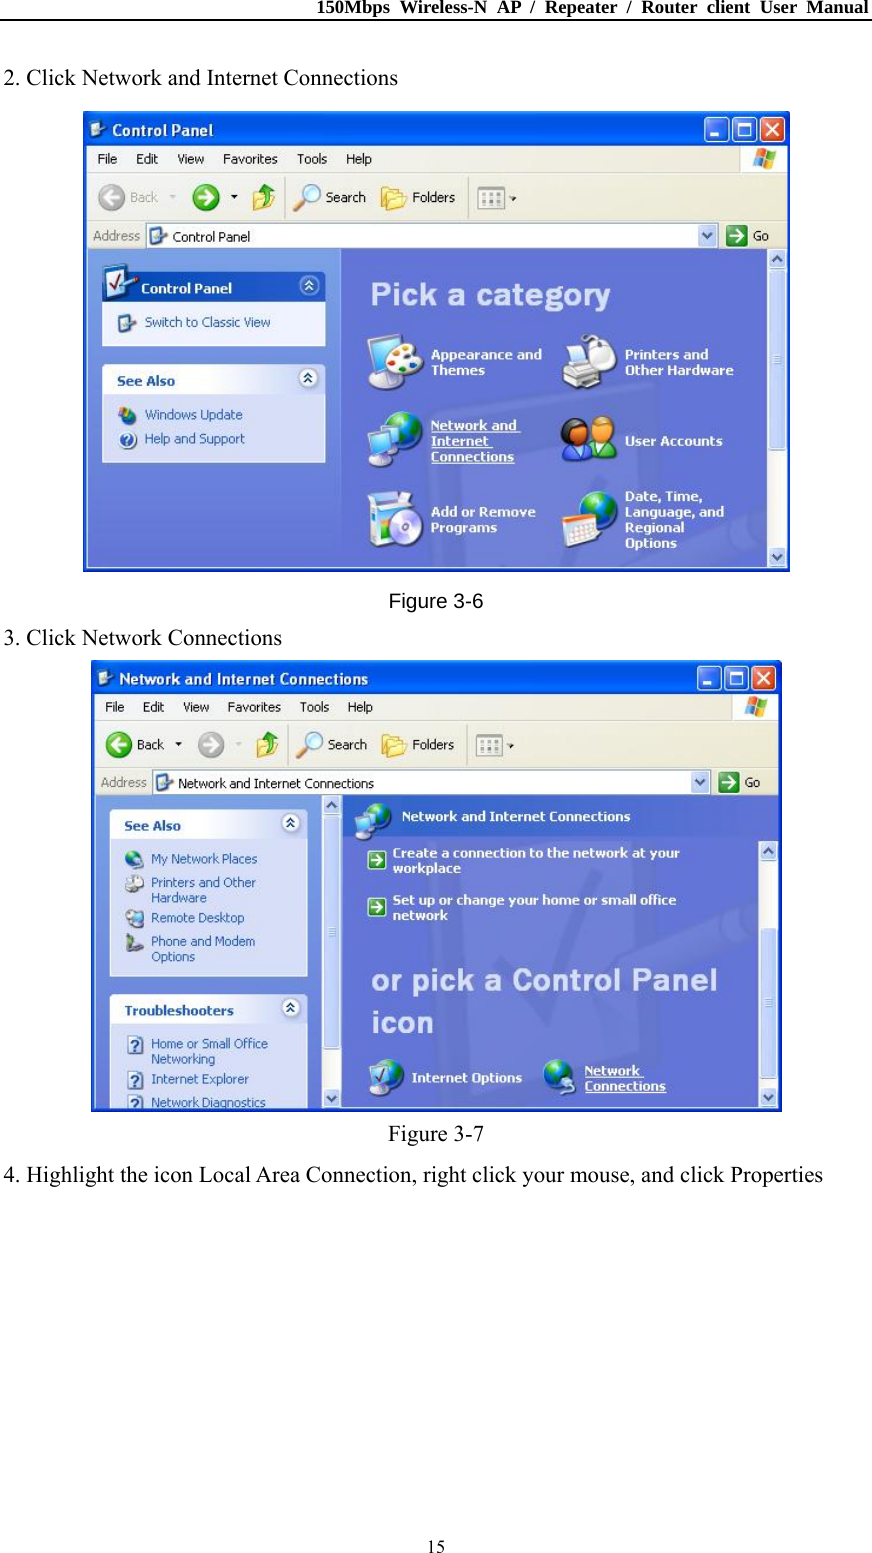 150Mbps Wireless-N AP / Repeater / Router client User Manual  152. Click Network and Internet Connections  Figure 3-6 3. Click Network Connections  Figure 3-7 4. Highlight the icon Local Area Connection, right click your mouse, and click Properties 